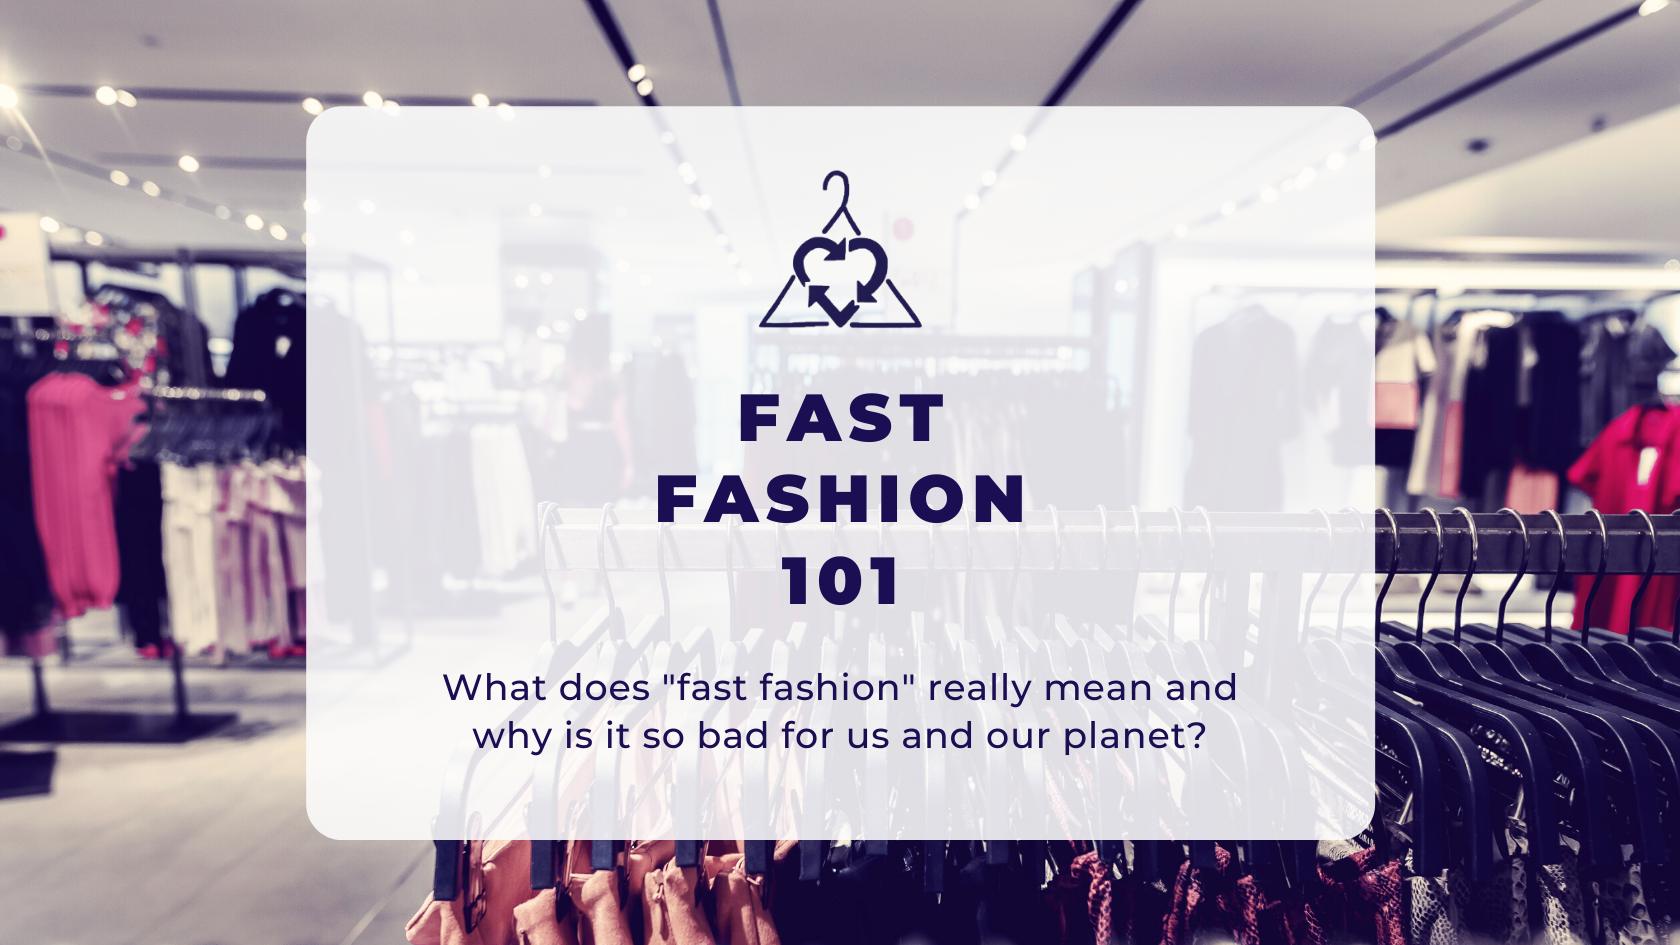 The truth about fast fashion and its affects on the industry and it's workers. Join us in creating a structural change through conscious consumer choices.